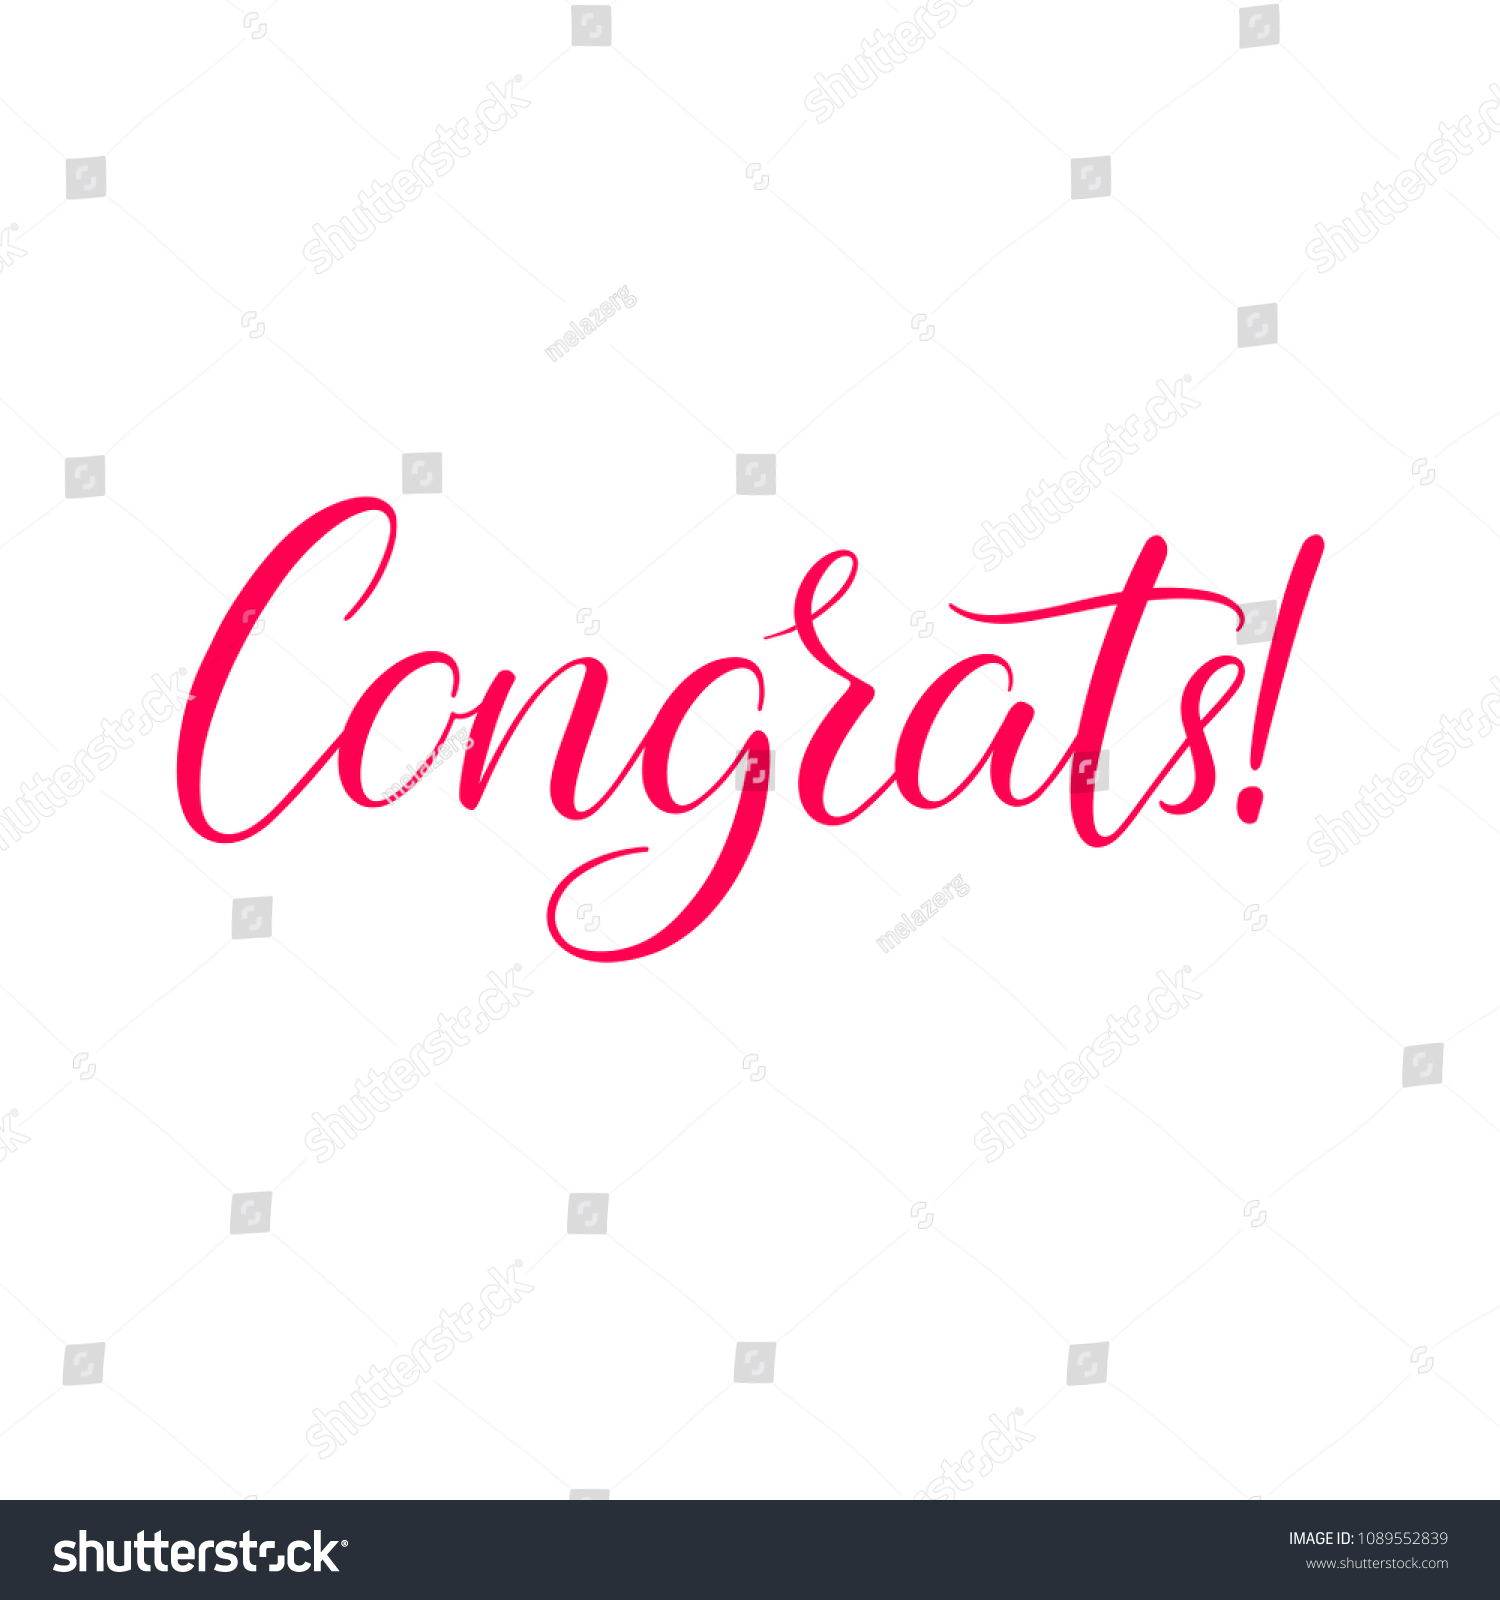 Congrats! Hand written calligraphy for congratulations and greeting cards. Isolated on white background #1089552839